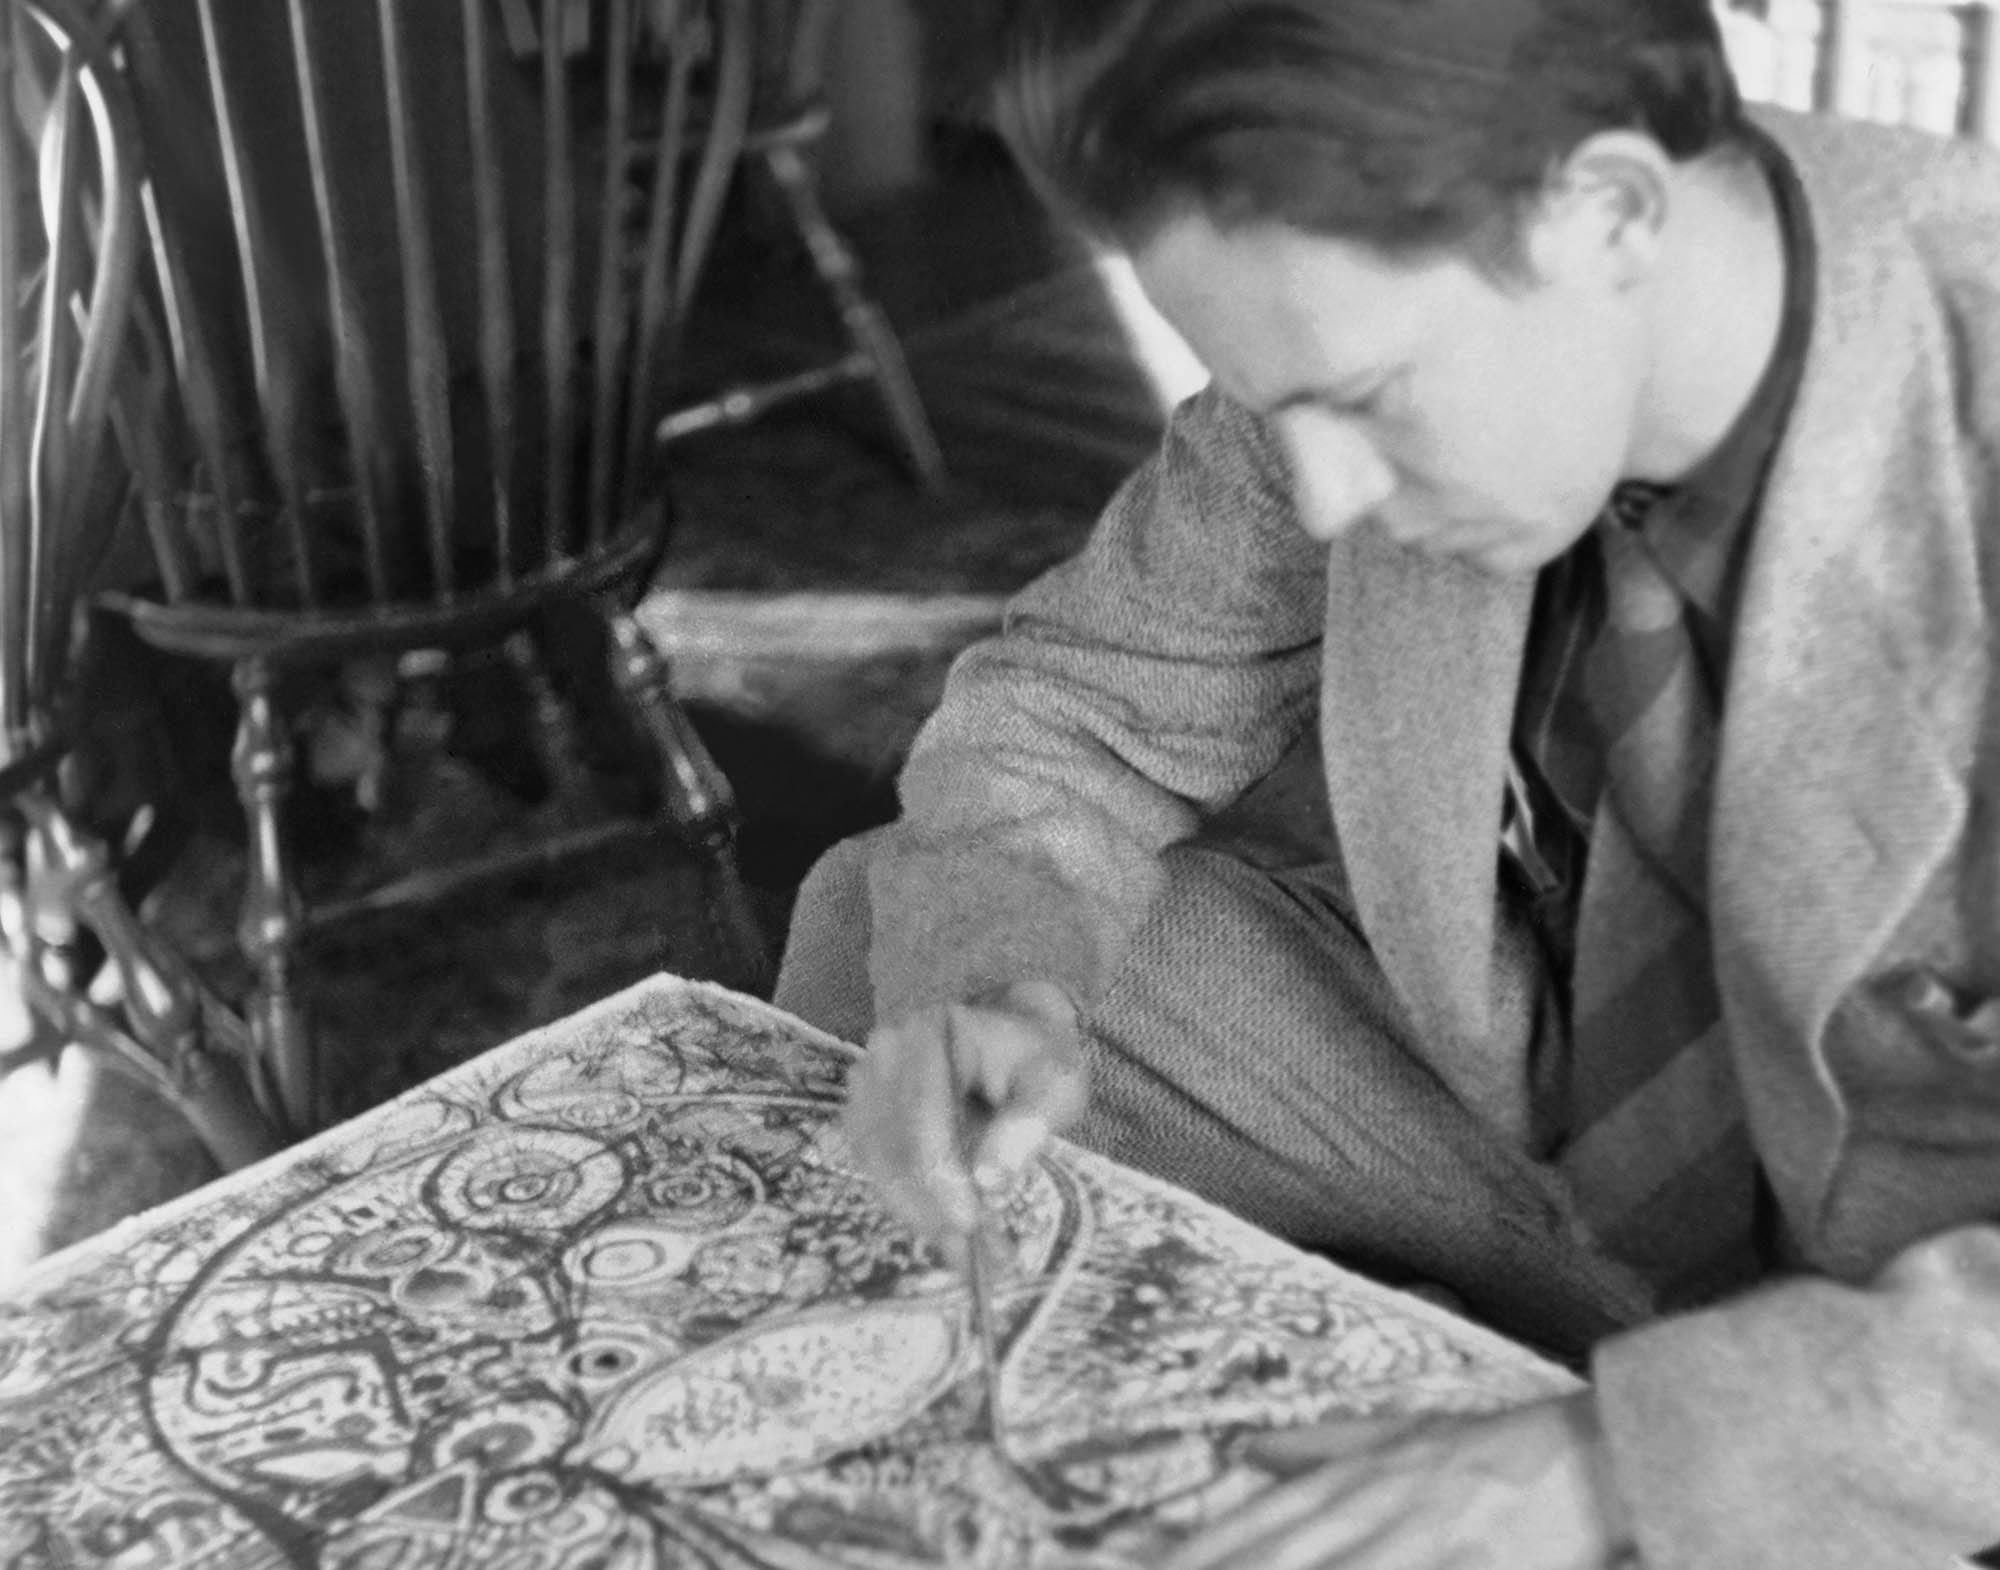 Richard Pousette-Dart working on the watercolor _[Sea World](https://pousette-dartfoundation.org/works/sea-world/)_, c. 1942-43, Photograph by Maggie Meredith
 – The Richard Pousette-Dart Foundation